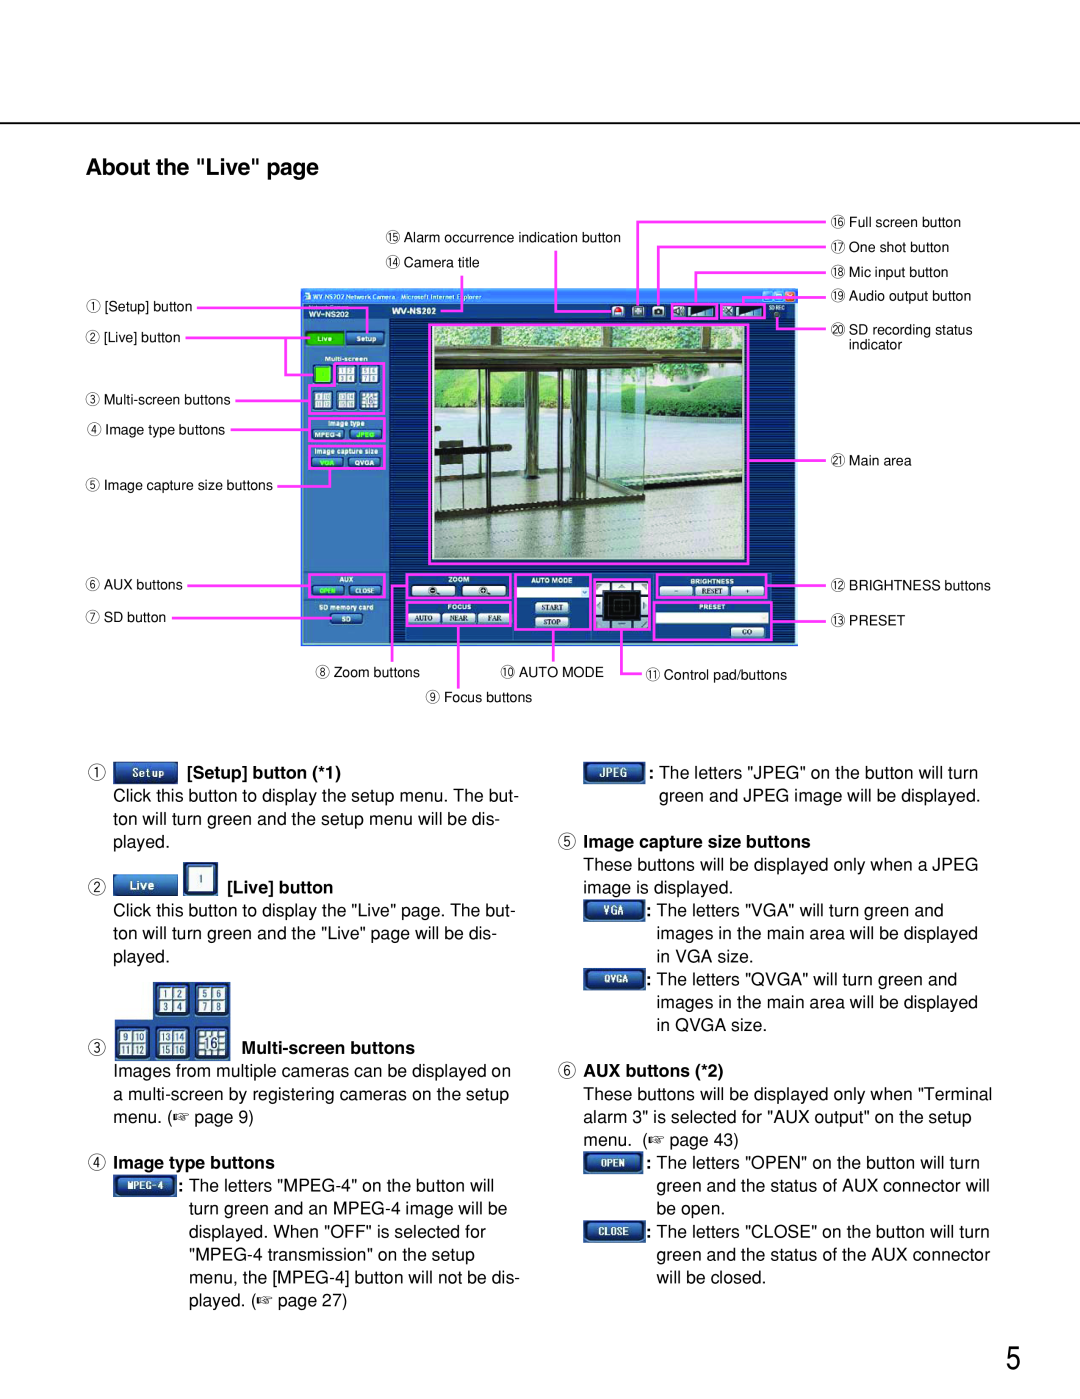 Panasonic WV-NS202 About the Live page, Setup button *1, Live button, Multi-screenbuttons, rImage type buttons 